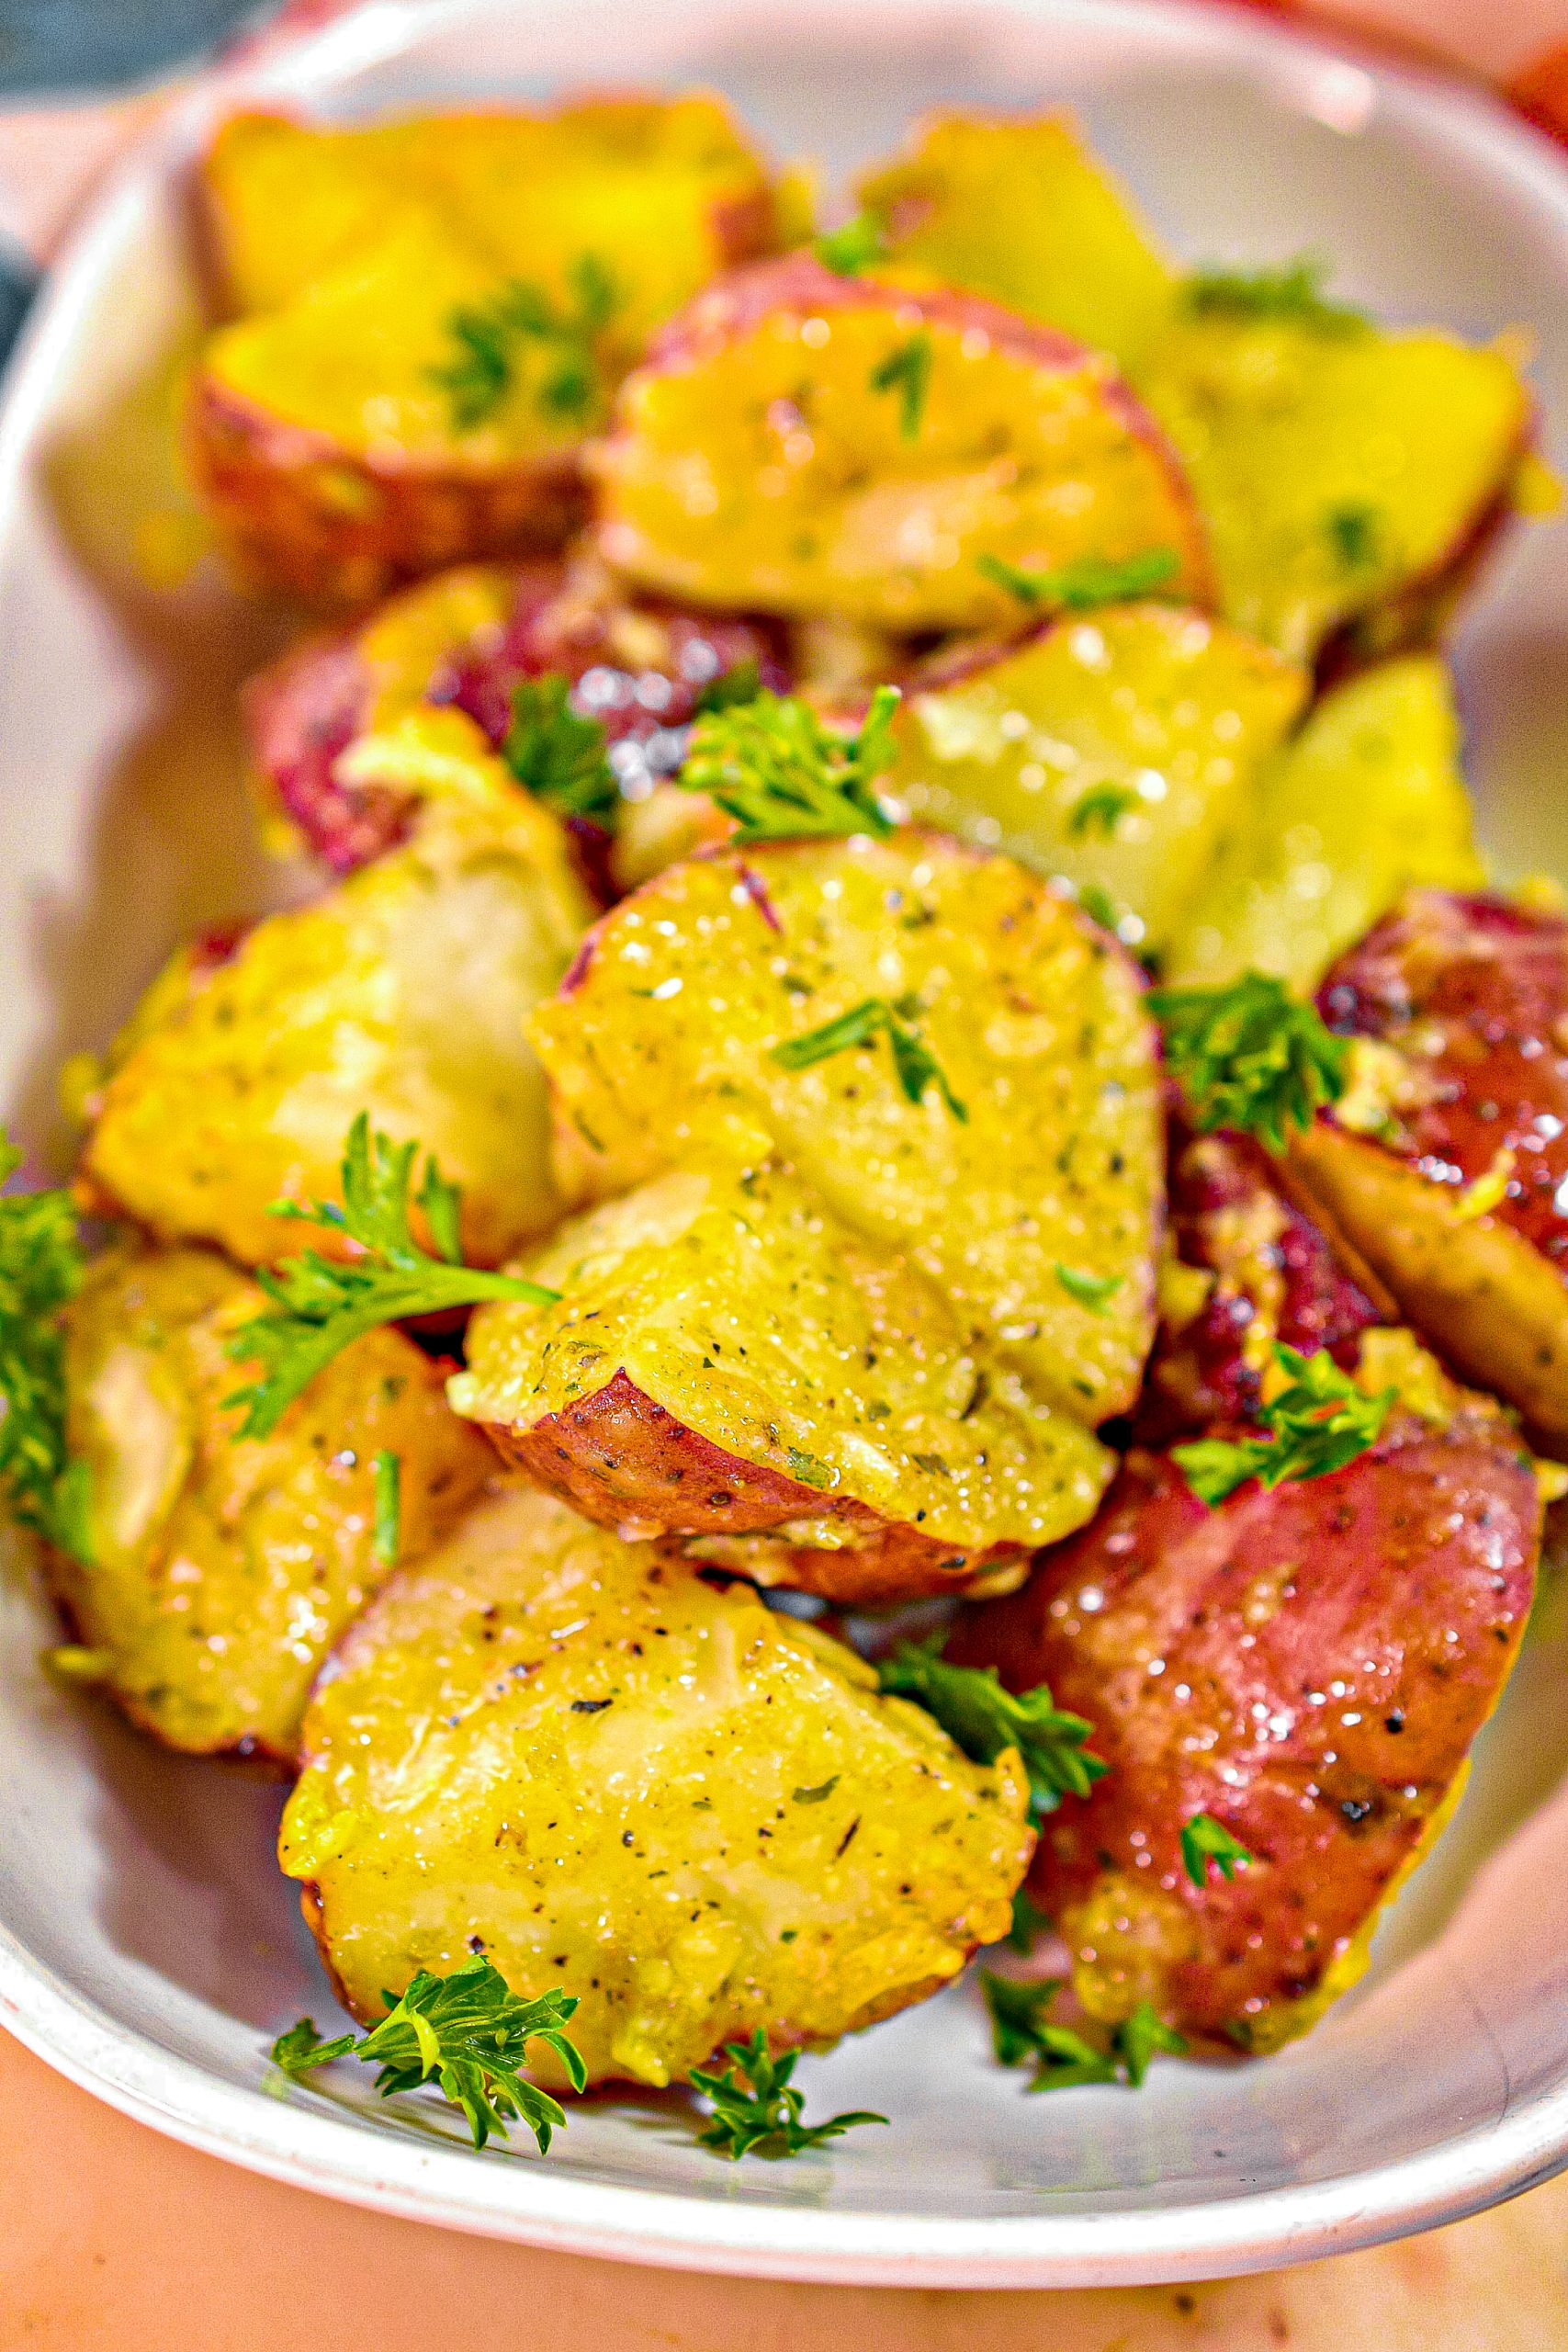 https://sweetpeaskitchen.com/wp-content/uploads/2023/05/Parmesan-Roasted-Red-Potatoes-2-scaled.jpg